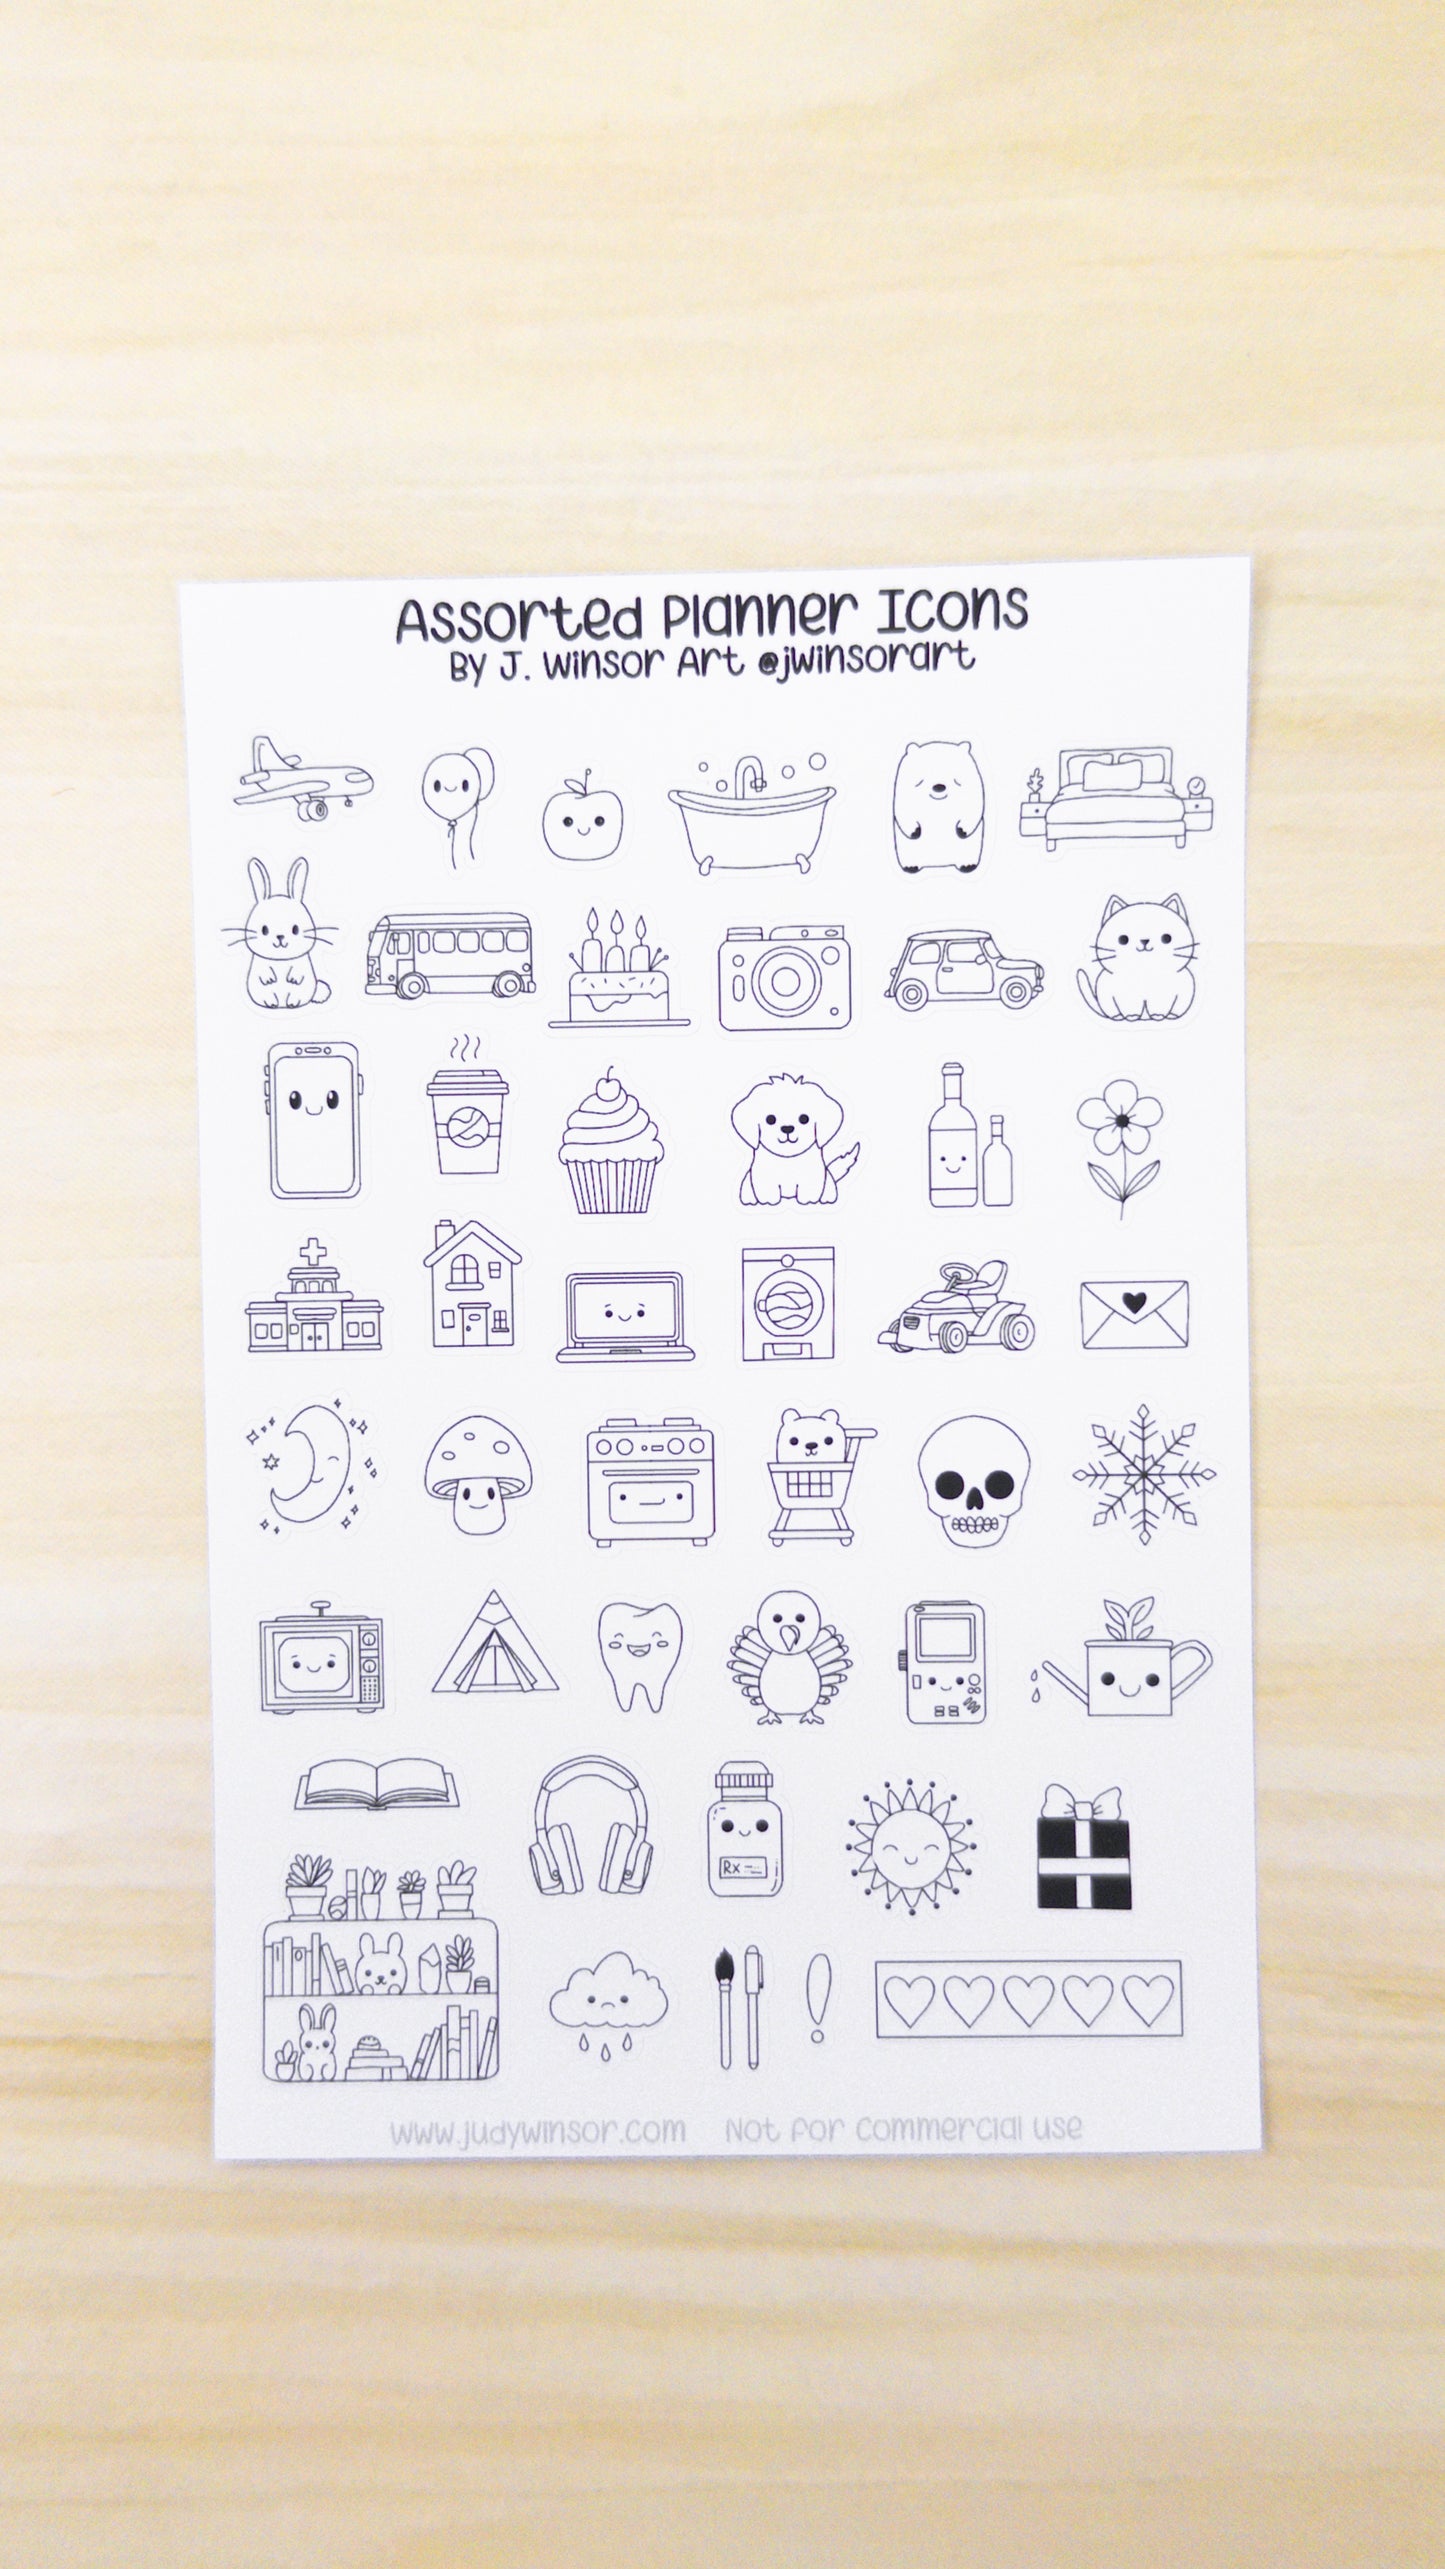 Assorted Planner Icons and Doodles Sticker Sheet Bujo Cute Kawaii Items Line Art Style Bullet Journal